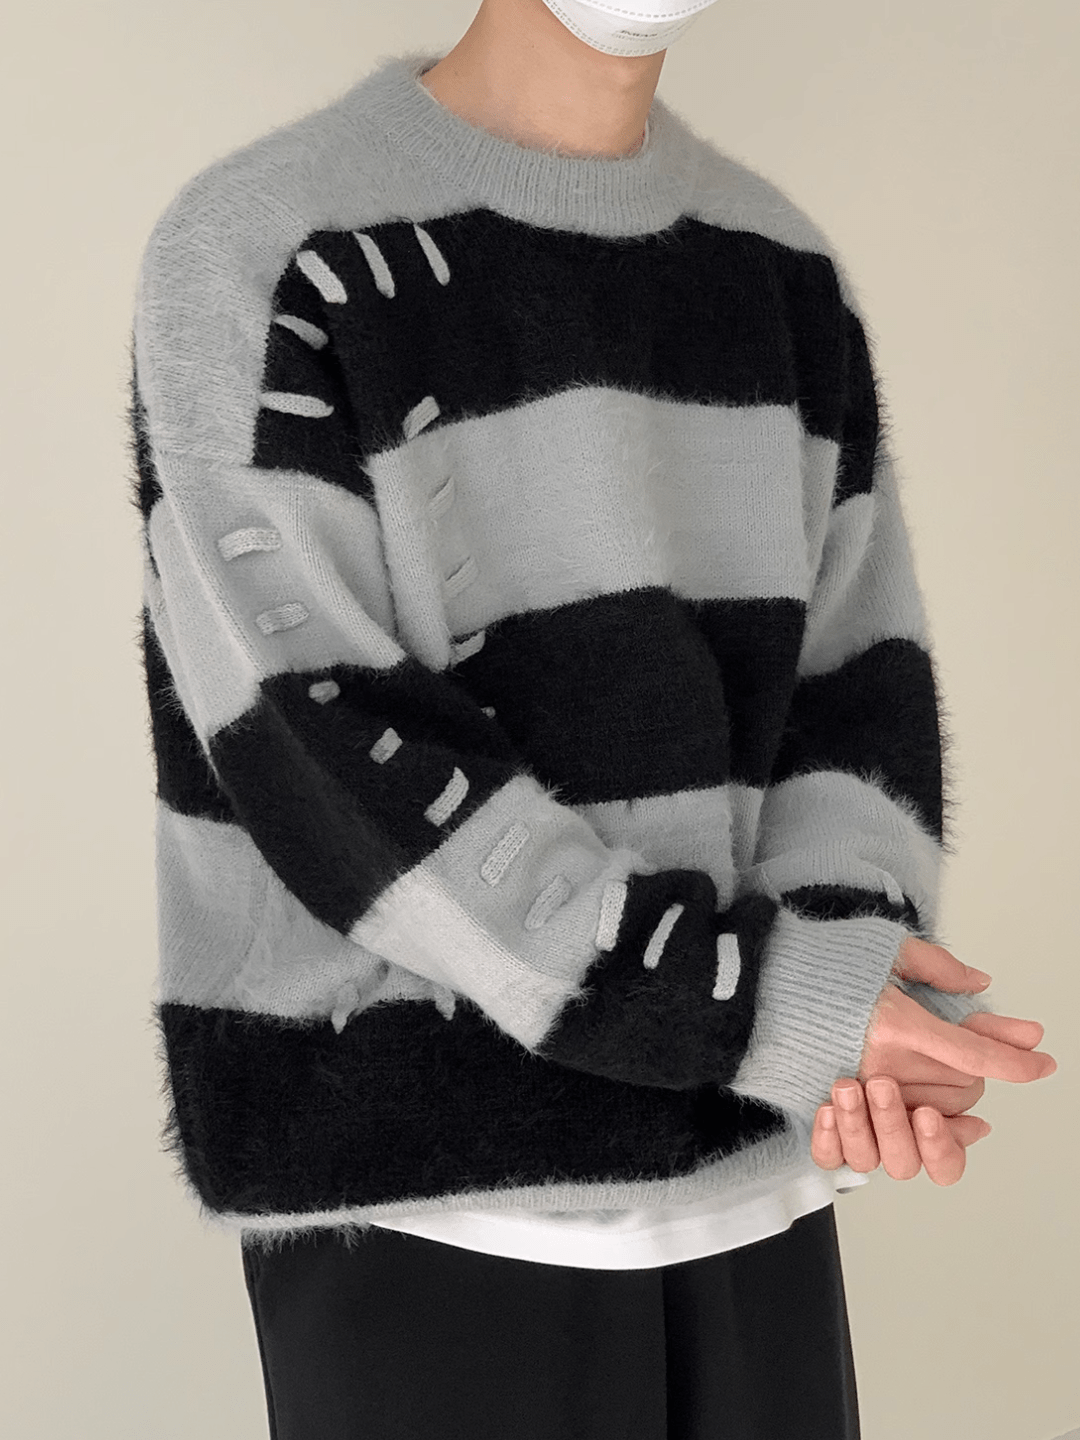 [DAZIONSED] Patch design mohair knit sweater na772